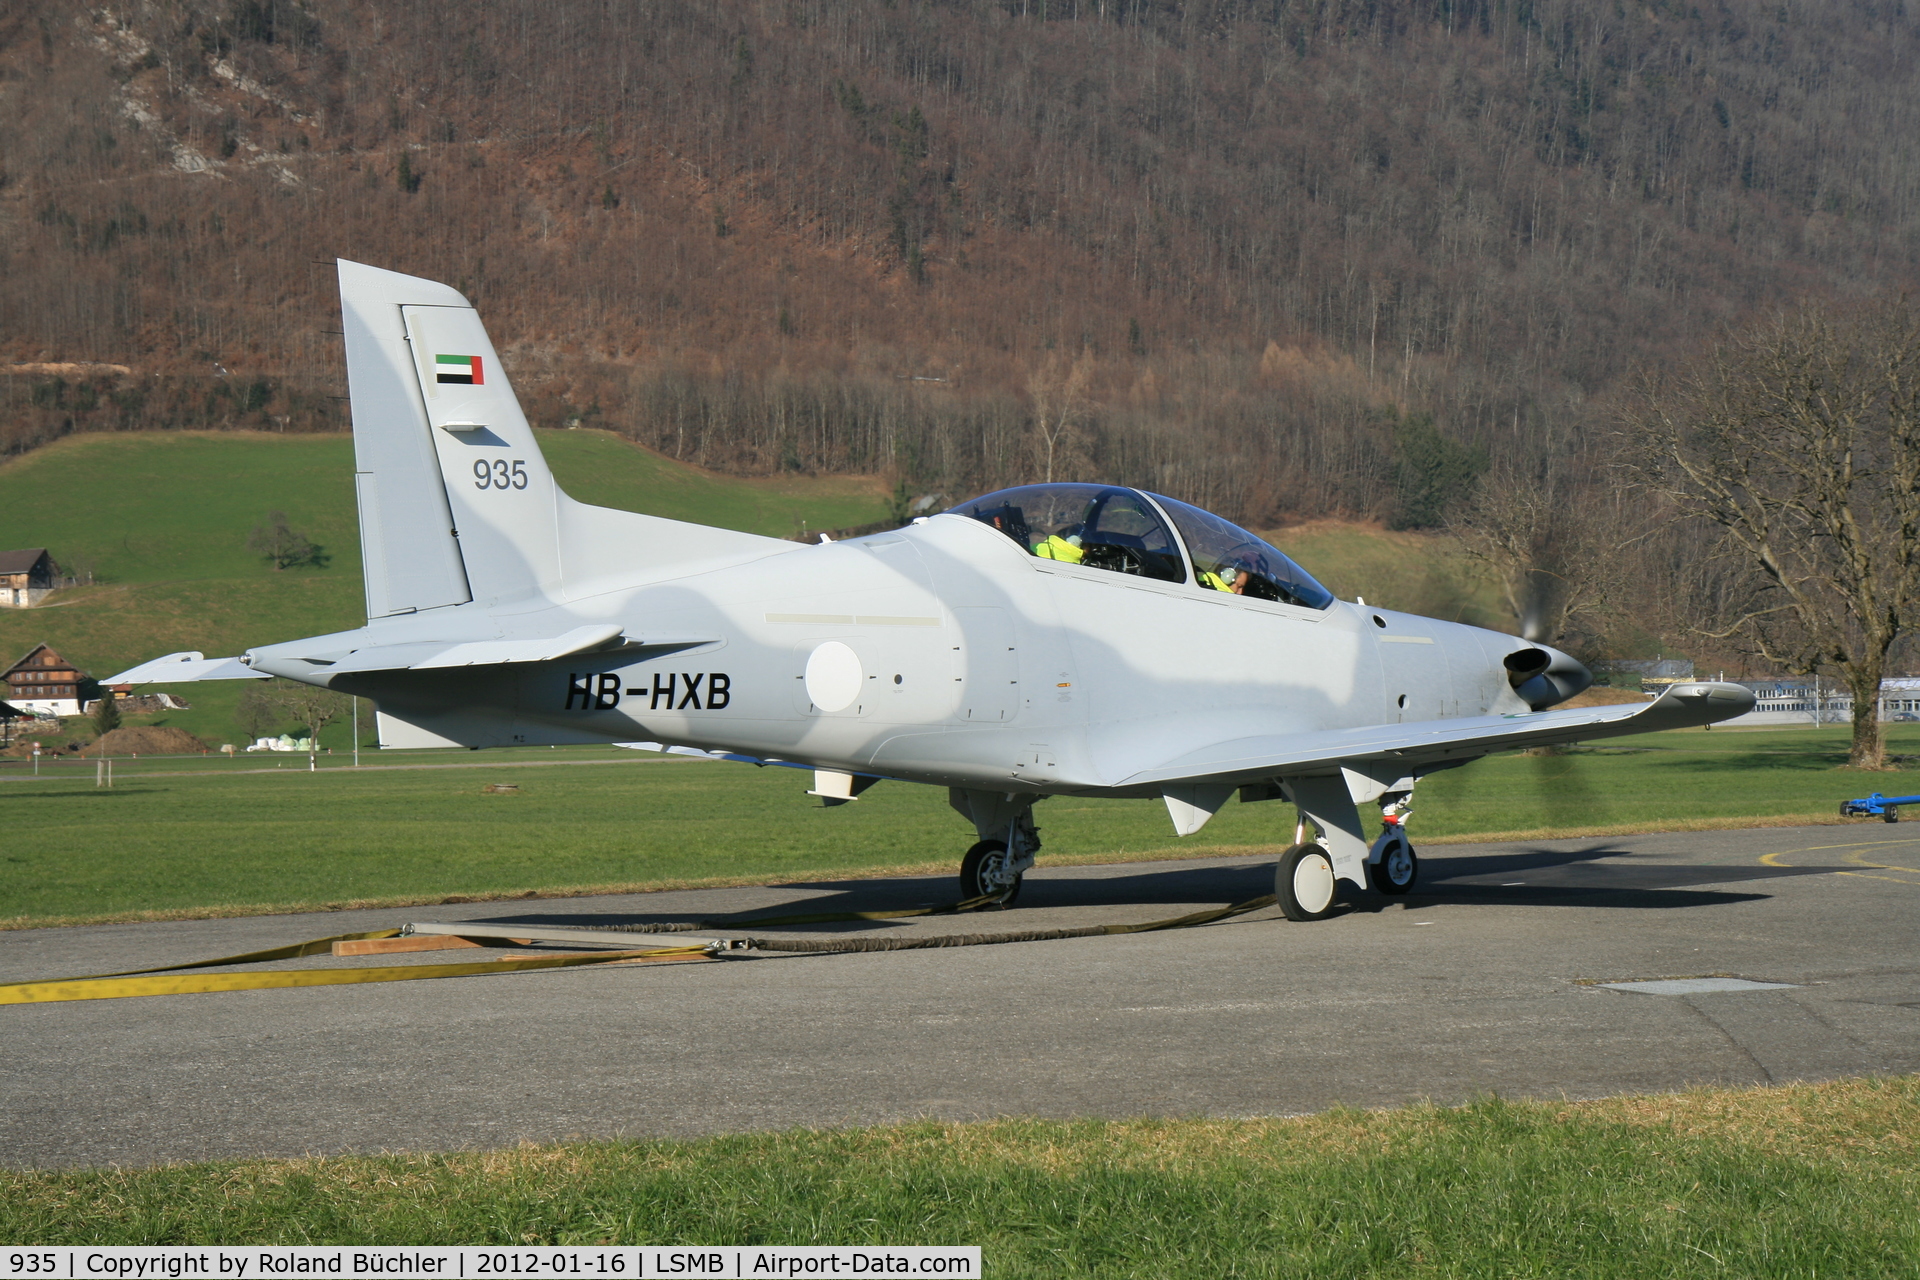 935, 2011 Pilatus PC-21 C/N 129, Pilatus PC-21, HB-HXB, prior delivery to the UAE Air Force with its codenumber 935